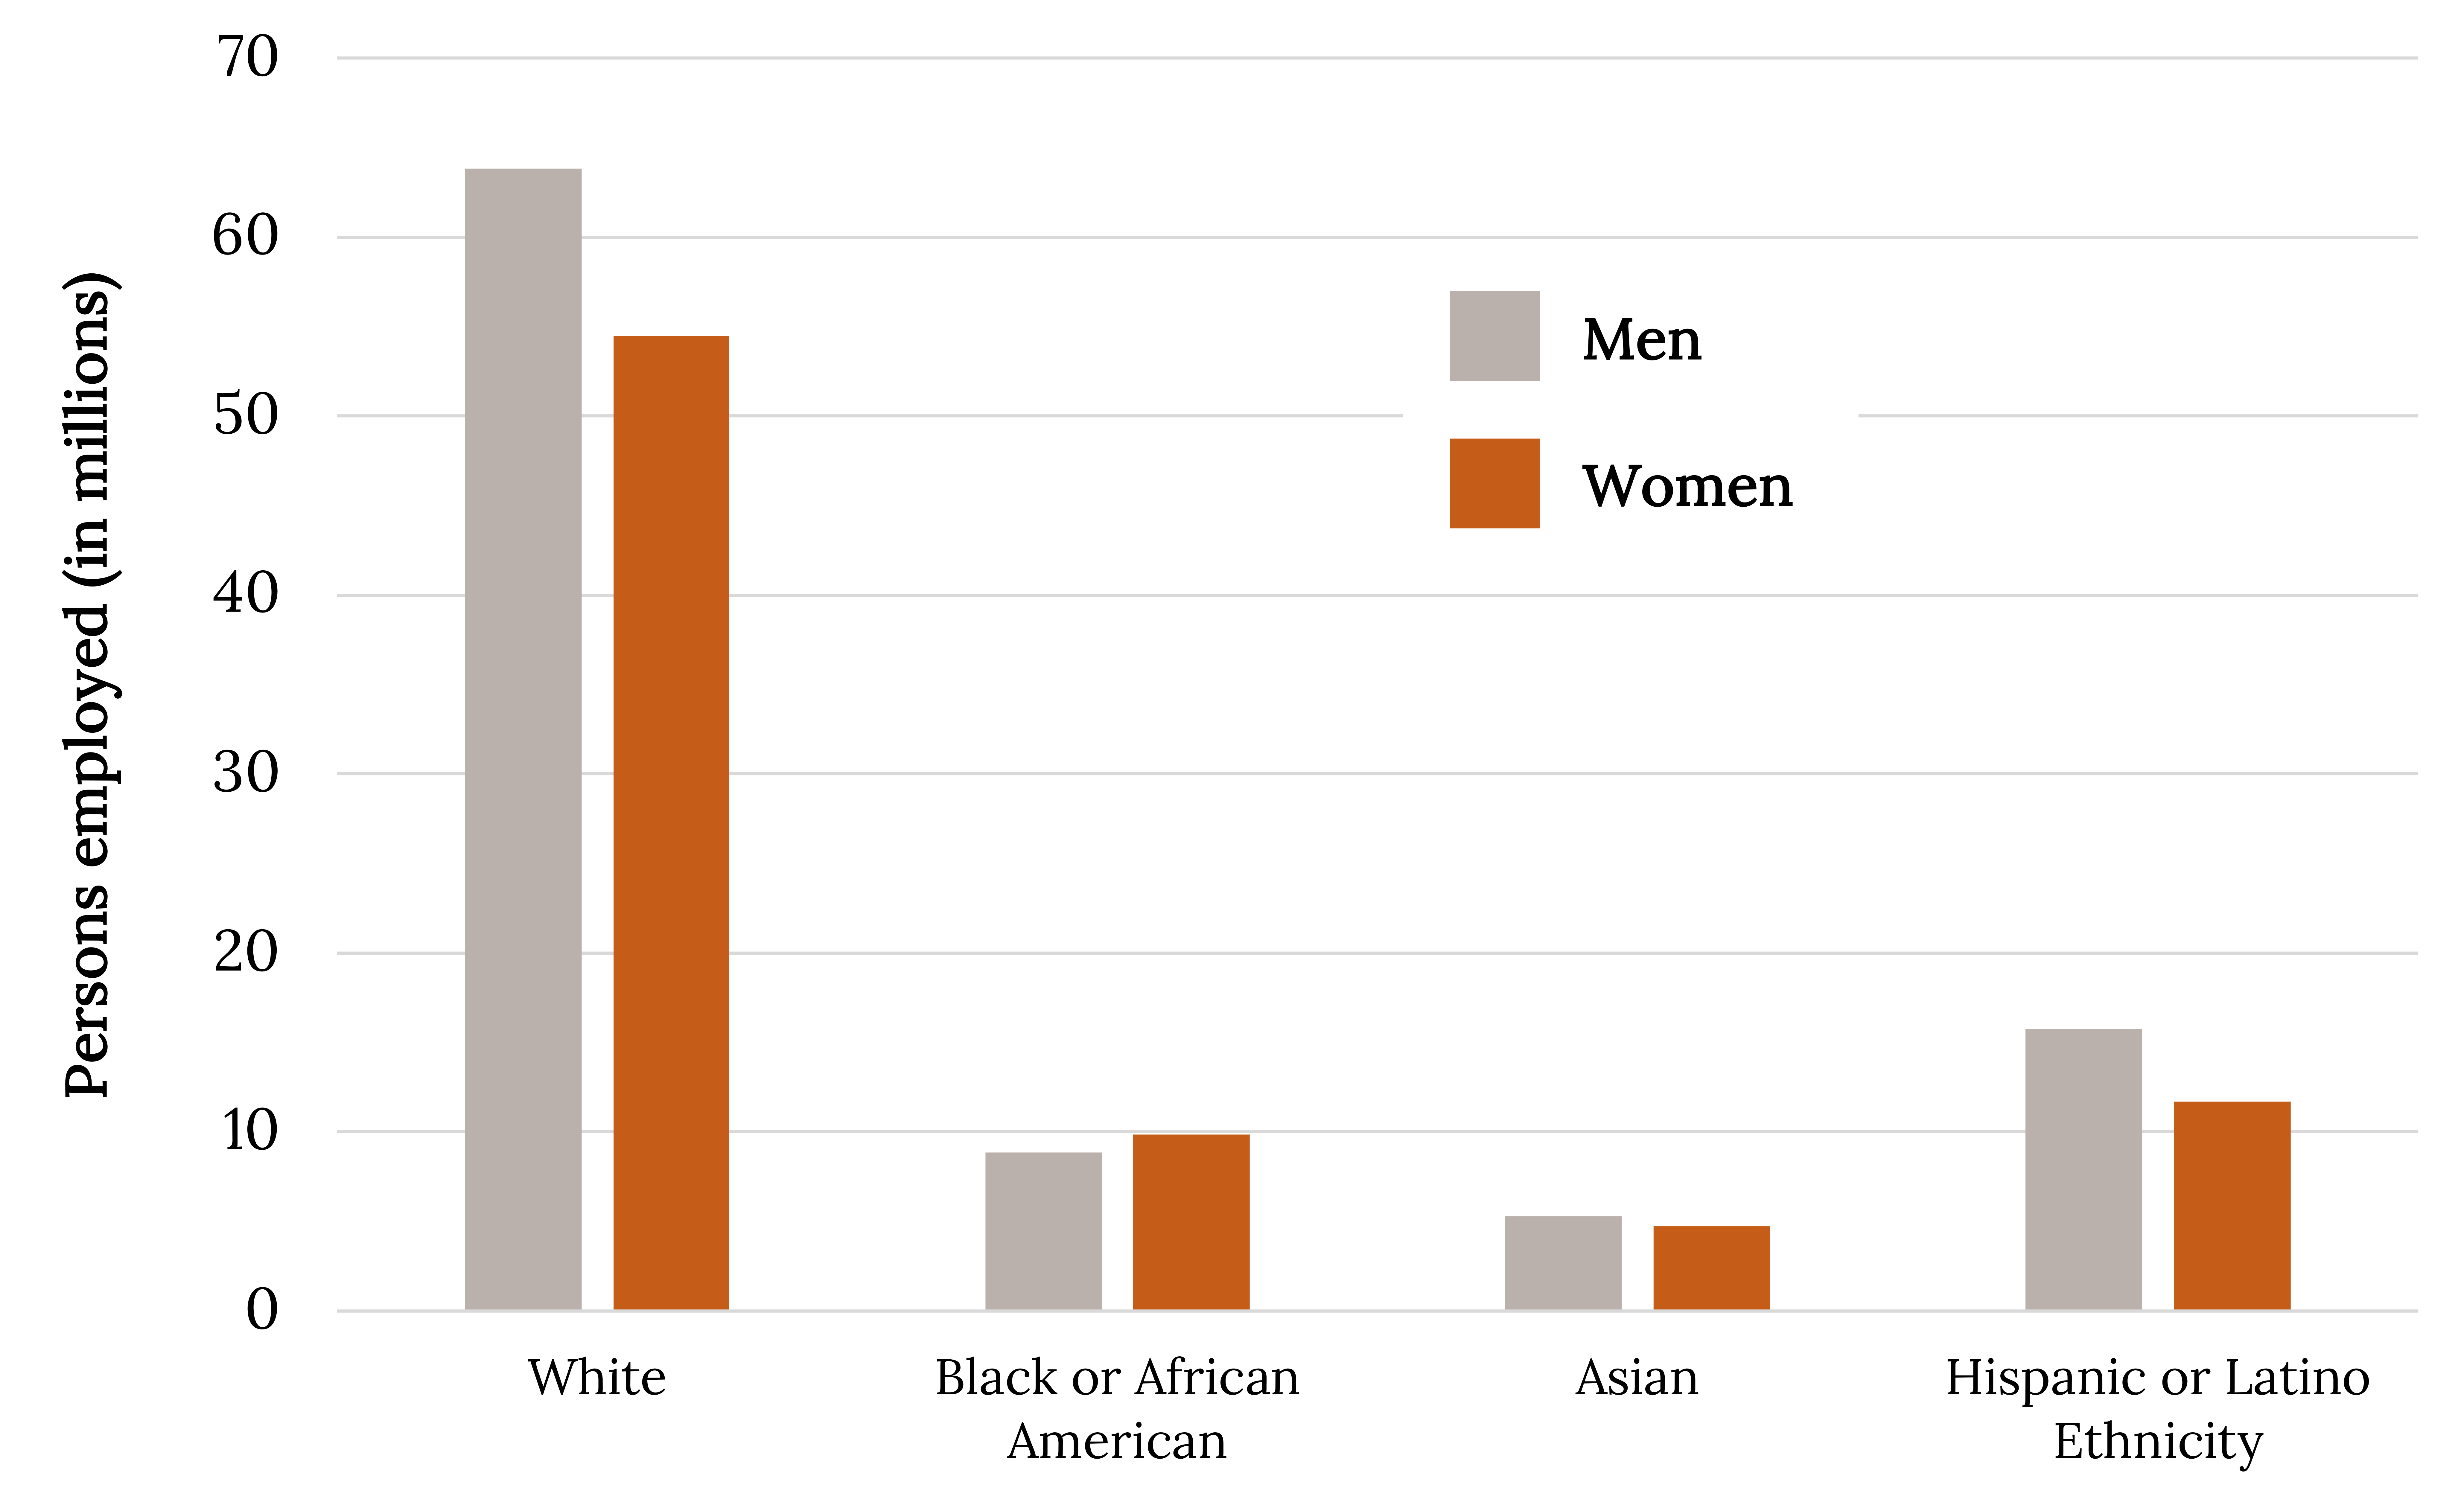 Vertical bar chart showing the amount of women and men employed by their ethnicity/race. The largest category is White and is around 65 million employees. Hispanic/Latino: 15 million. Black/African American: 10 million. Asian: 5 million. There are more men employed than women for every race except Black/African American.